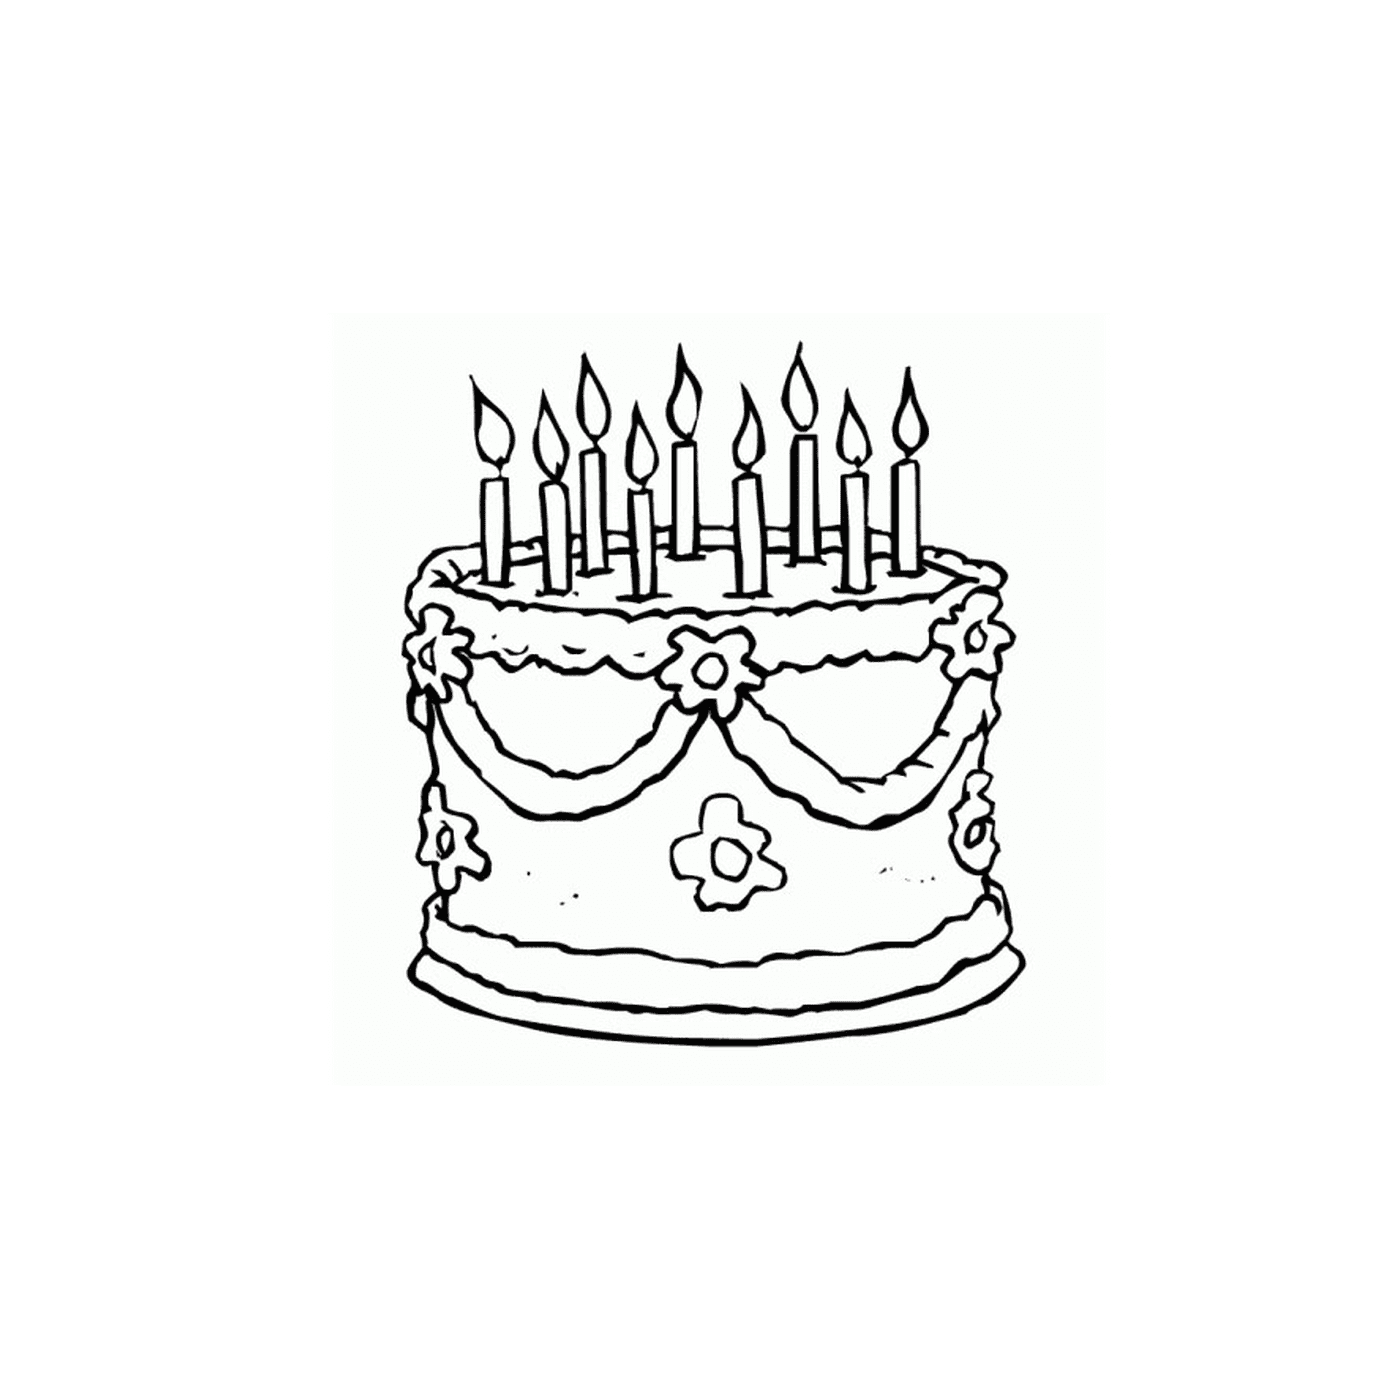  a birthday cake with candles 